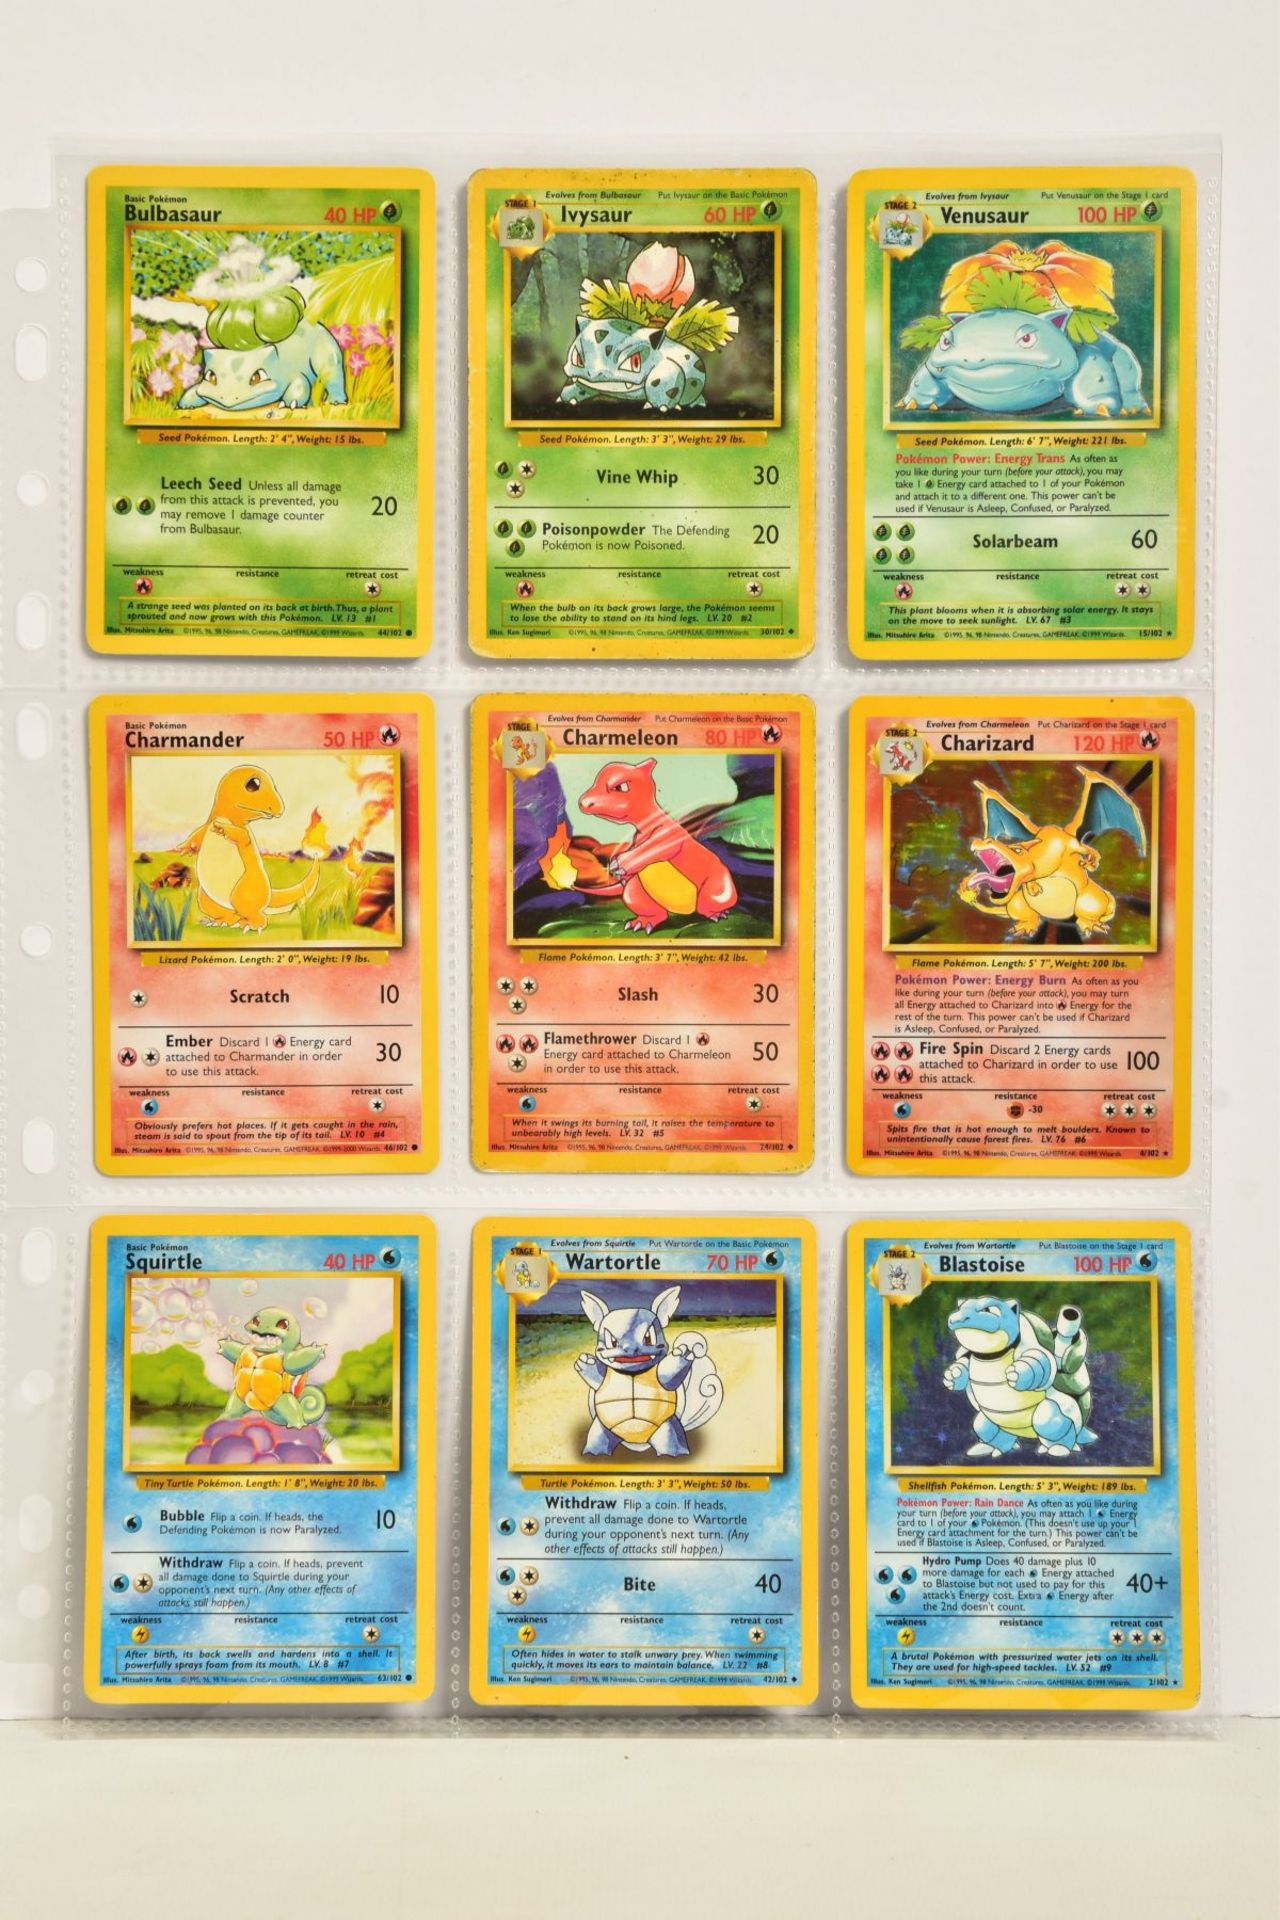 POKEMON THE TRADING CARD GAME 154 CARDS IN POKEMON TCG FOLDER, includes one of each of the - Image 2 of 20